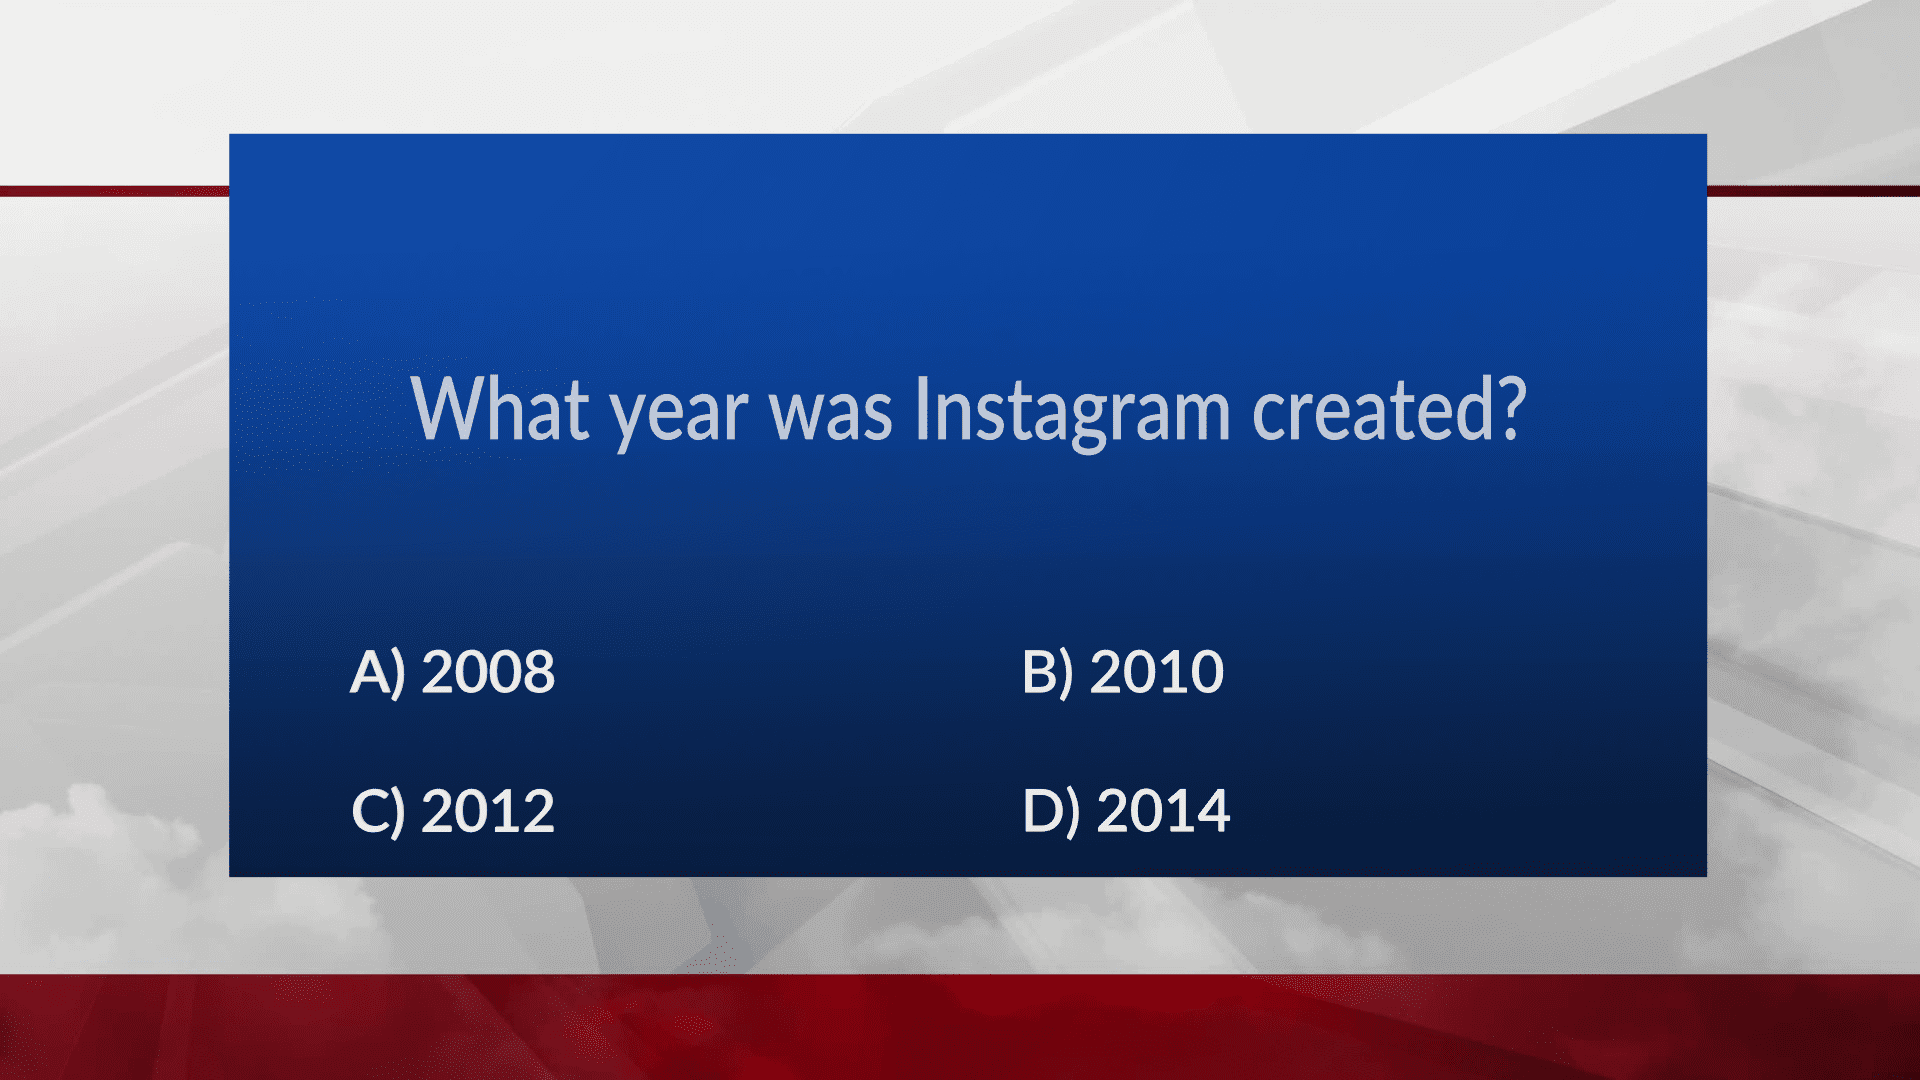 What year was Instagram created?